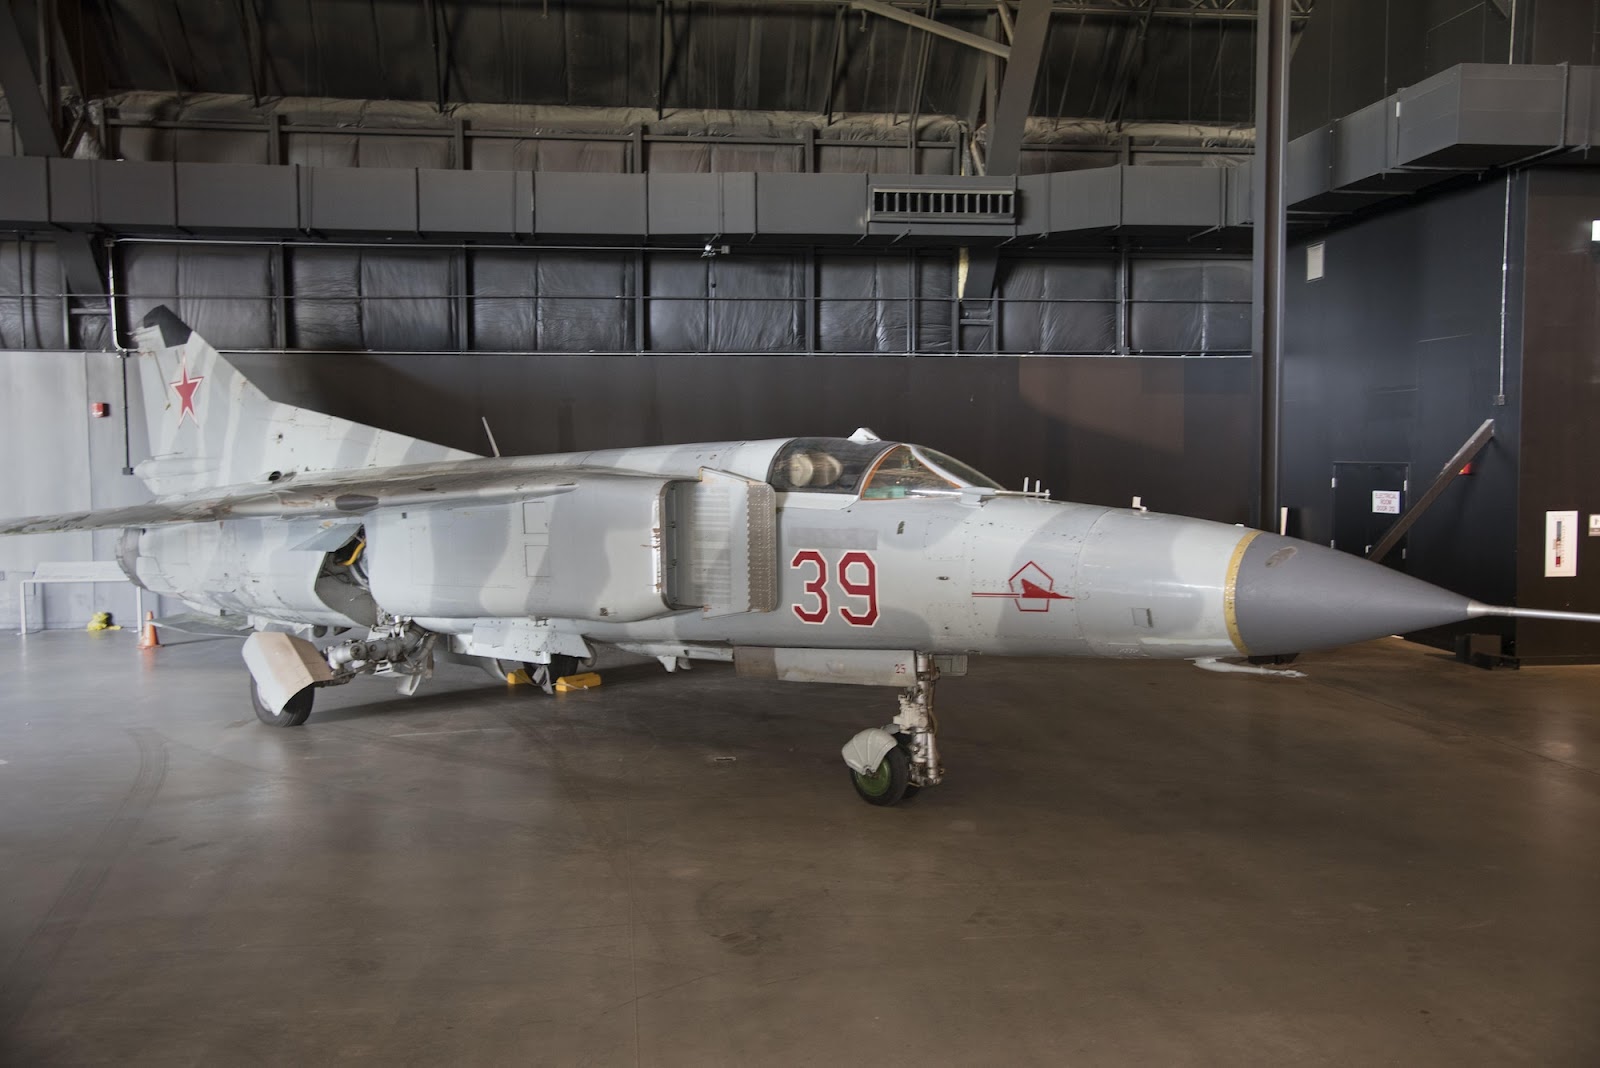 MiG-23 (Photo: National Museum of the USAF)